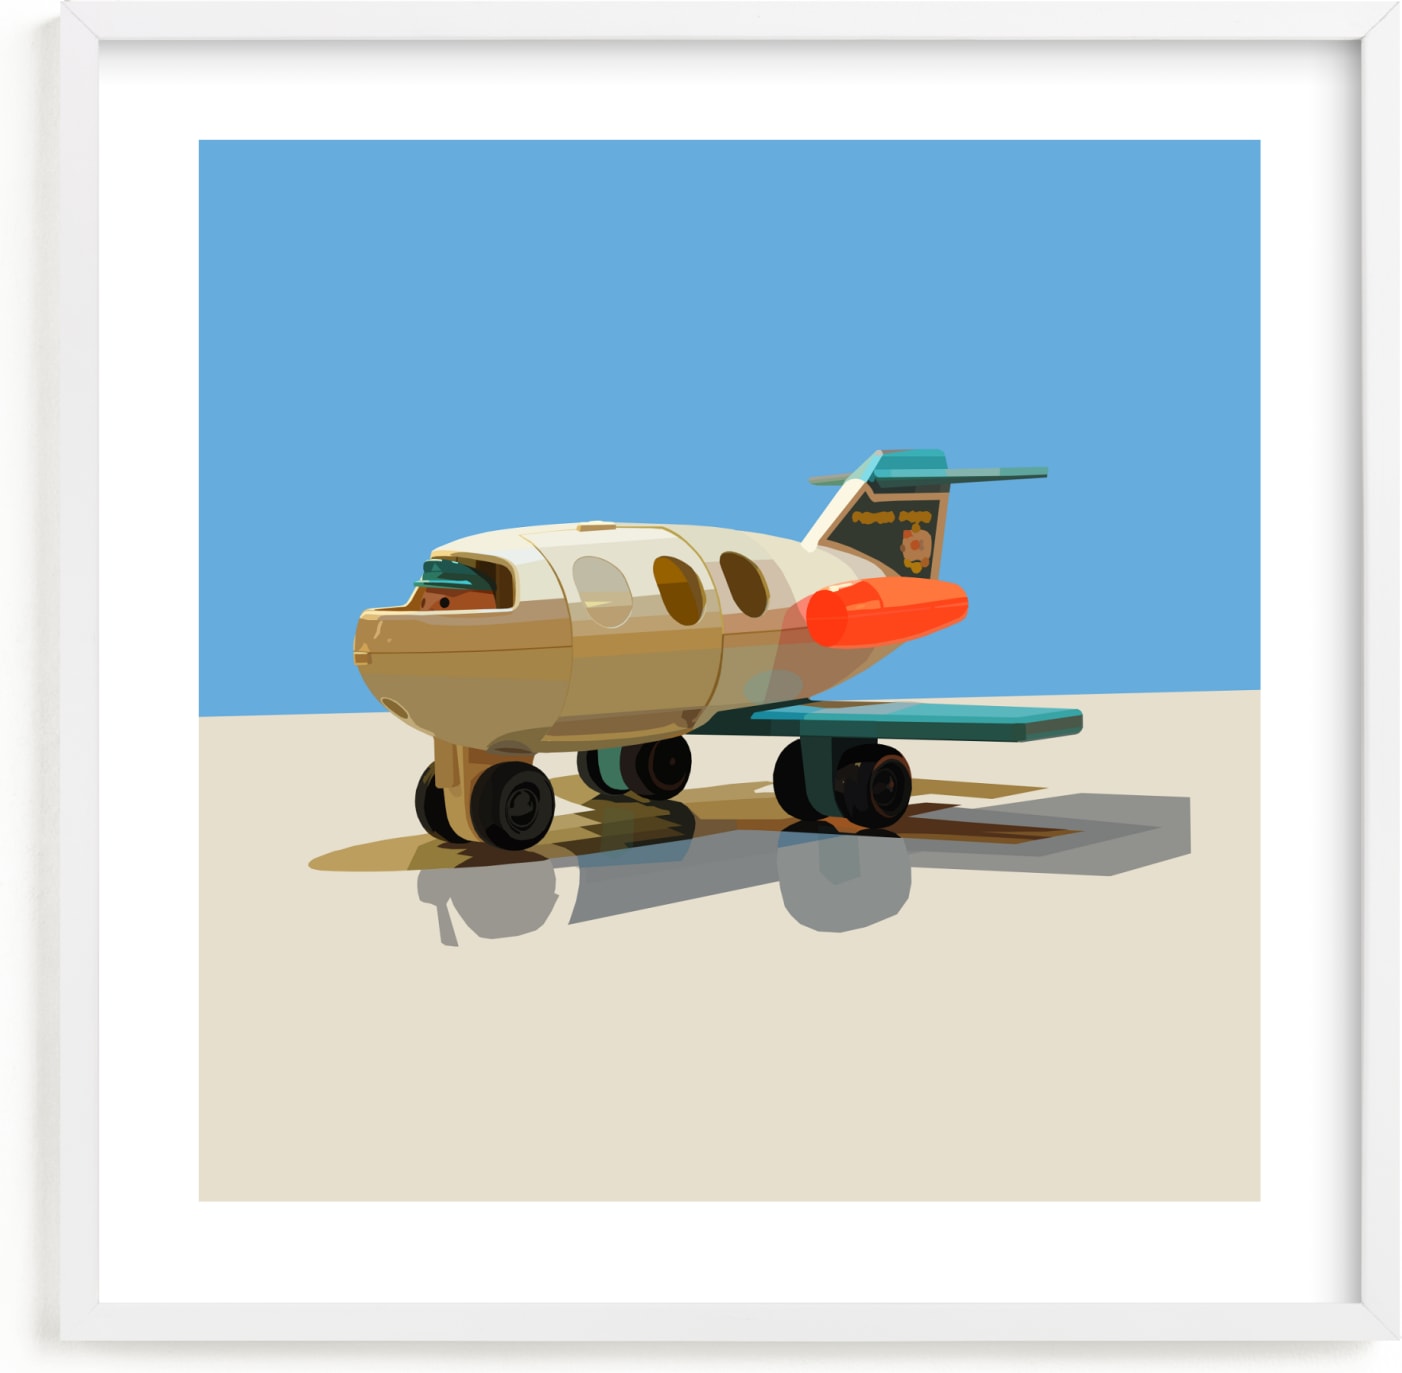 This is a blue kids wall art by John Andrew Ward called Toy Jet.